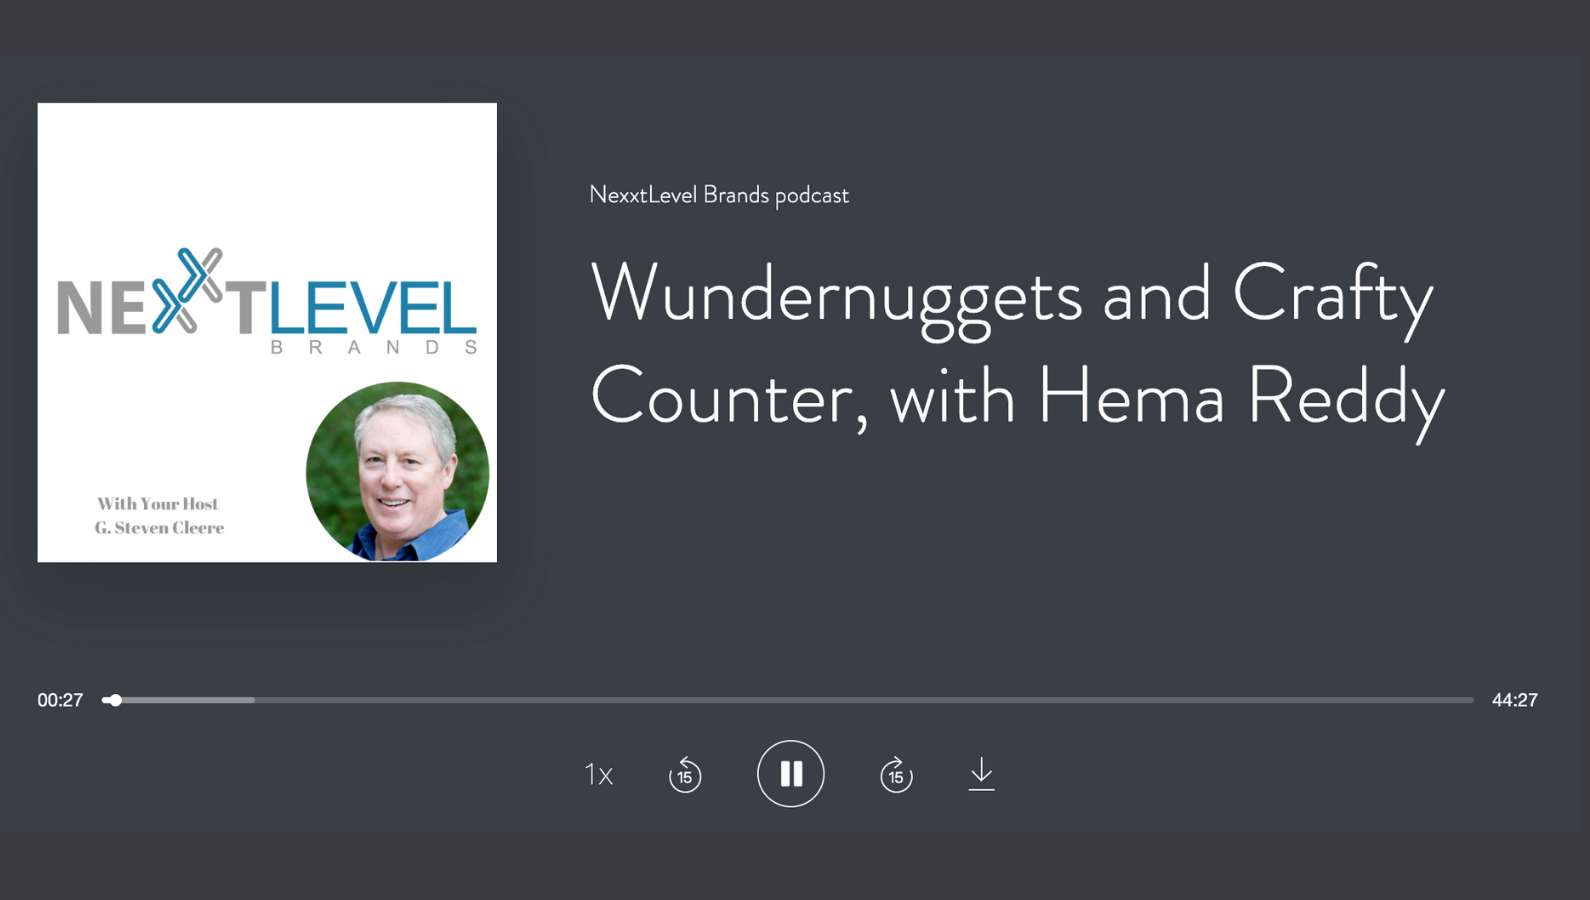 Hear it from the founder - Hema Reddy on Nexxt Level Brands Podcast